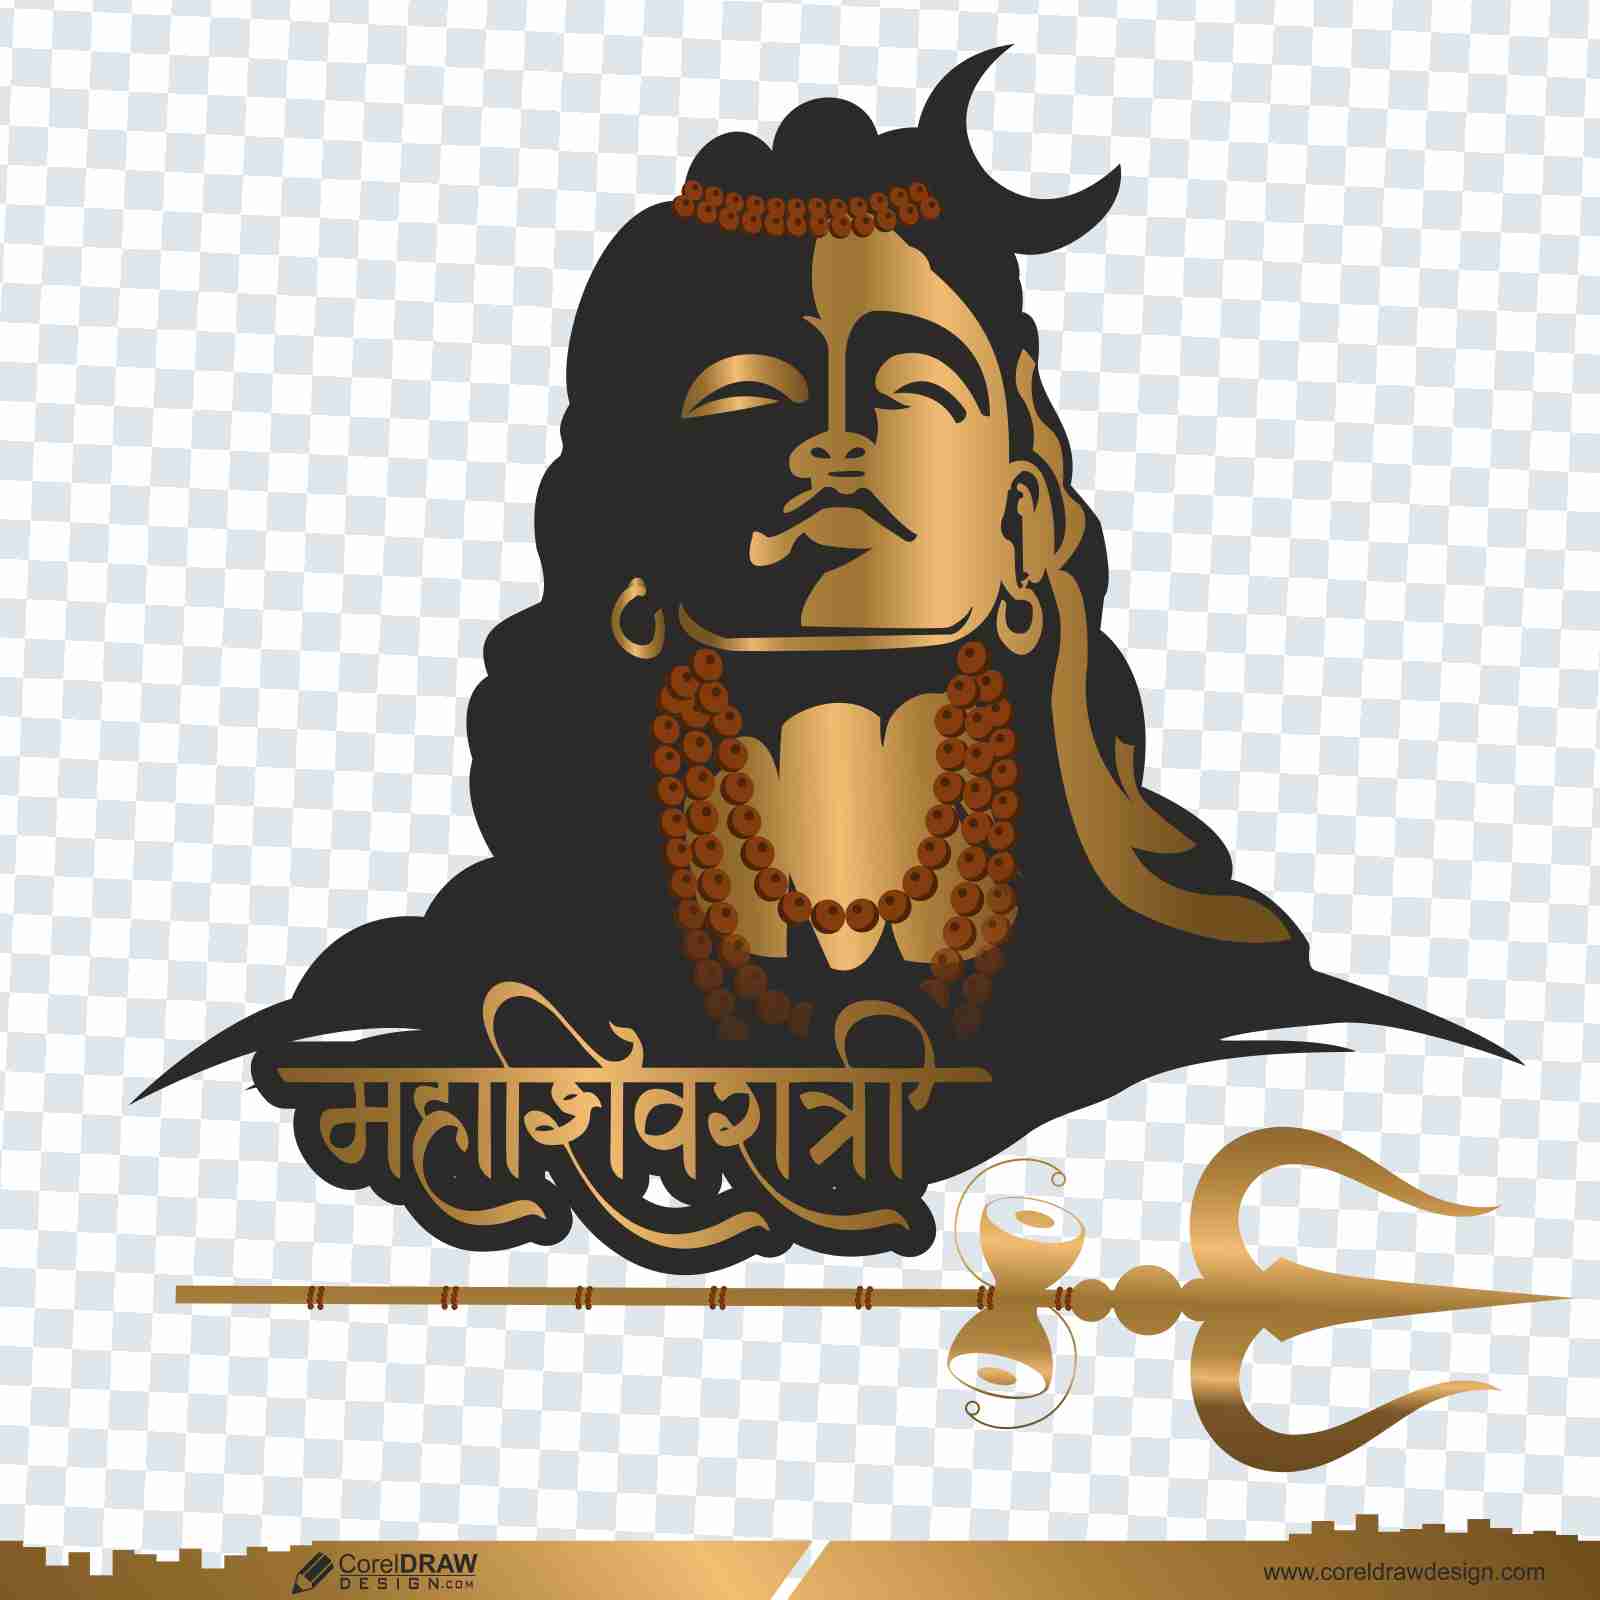 Lord Shiva Vector Art, Icons, and Graphics for Free Download